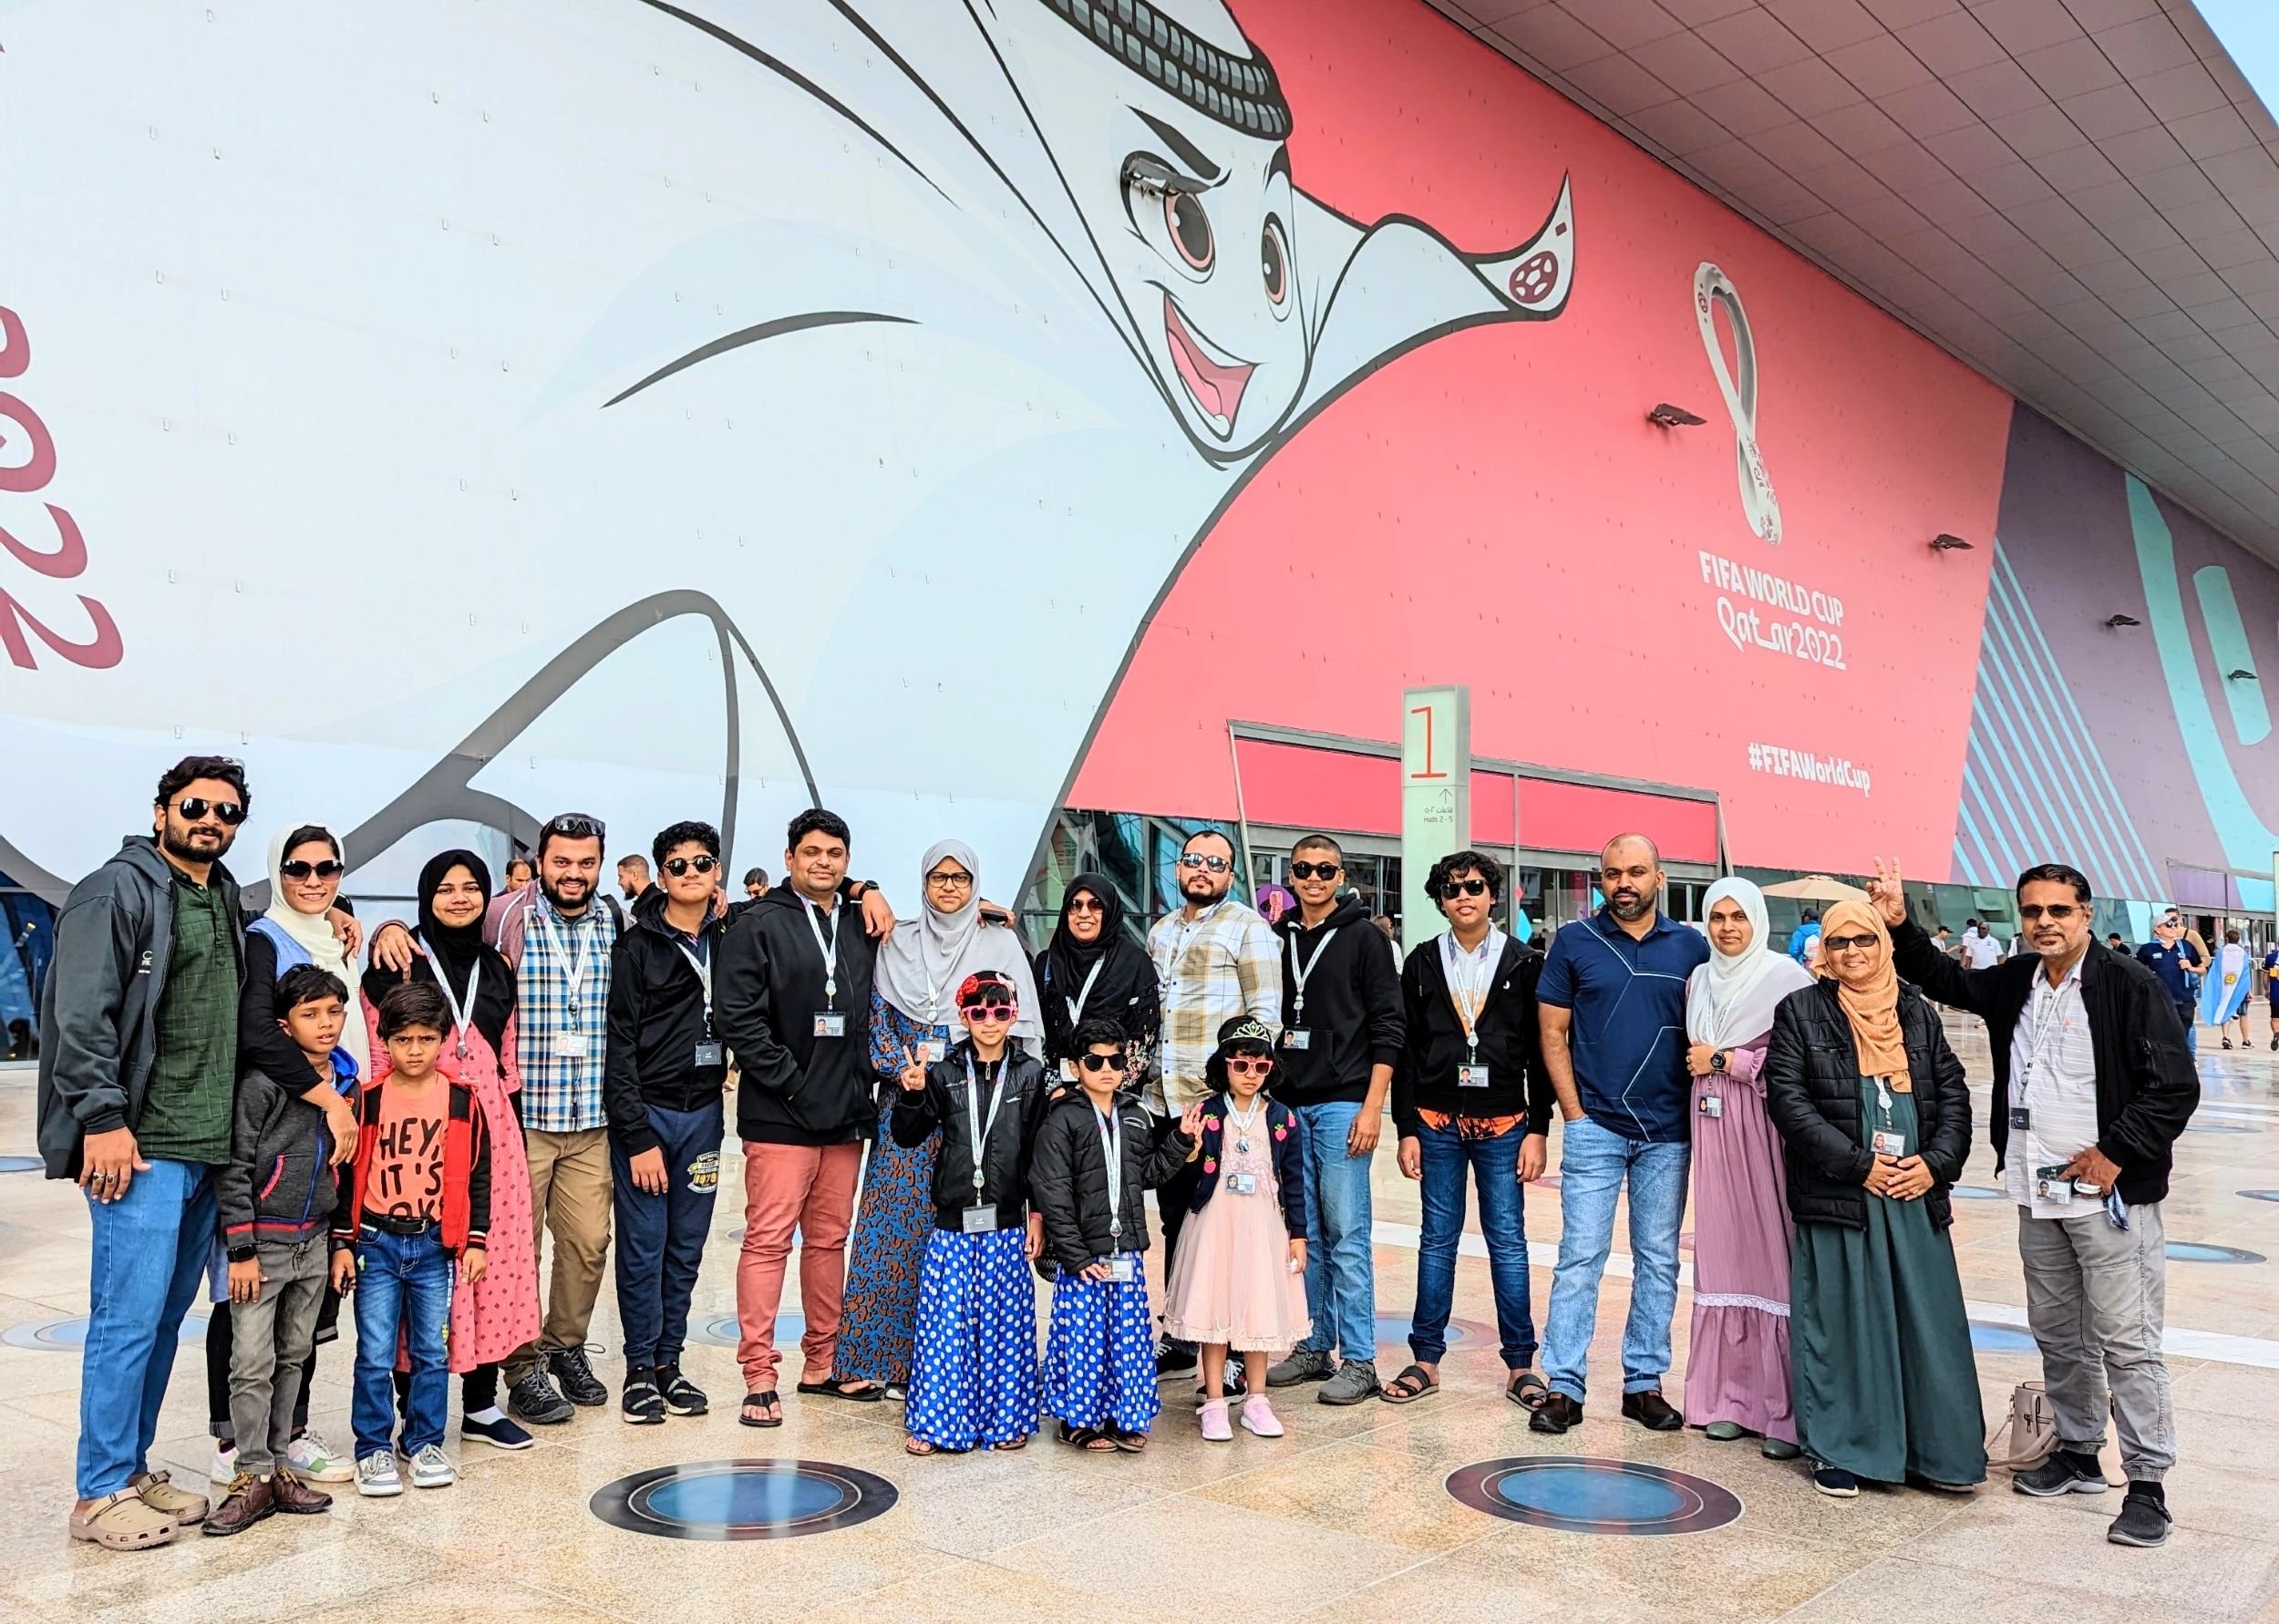 Ambala Purath Ali Koya from Kerala, India met all his sons and their families living in Saudi, Bahrain and Dubai when he came to Qatar for World Cup (Ali (MEE/Umer Naseef)